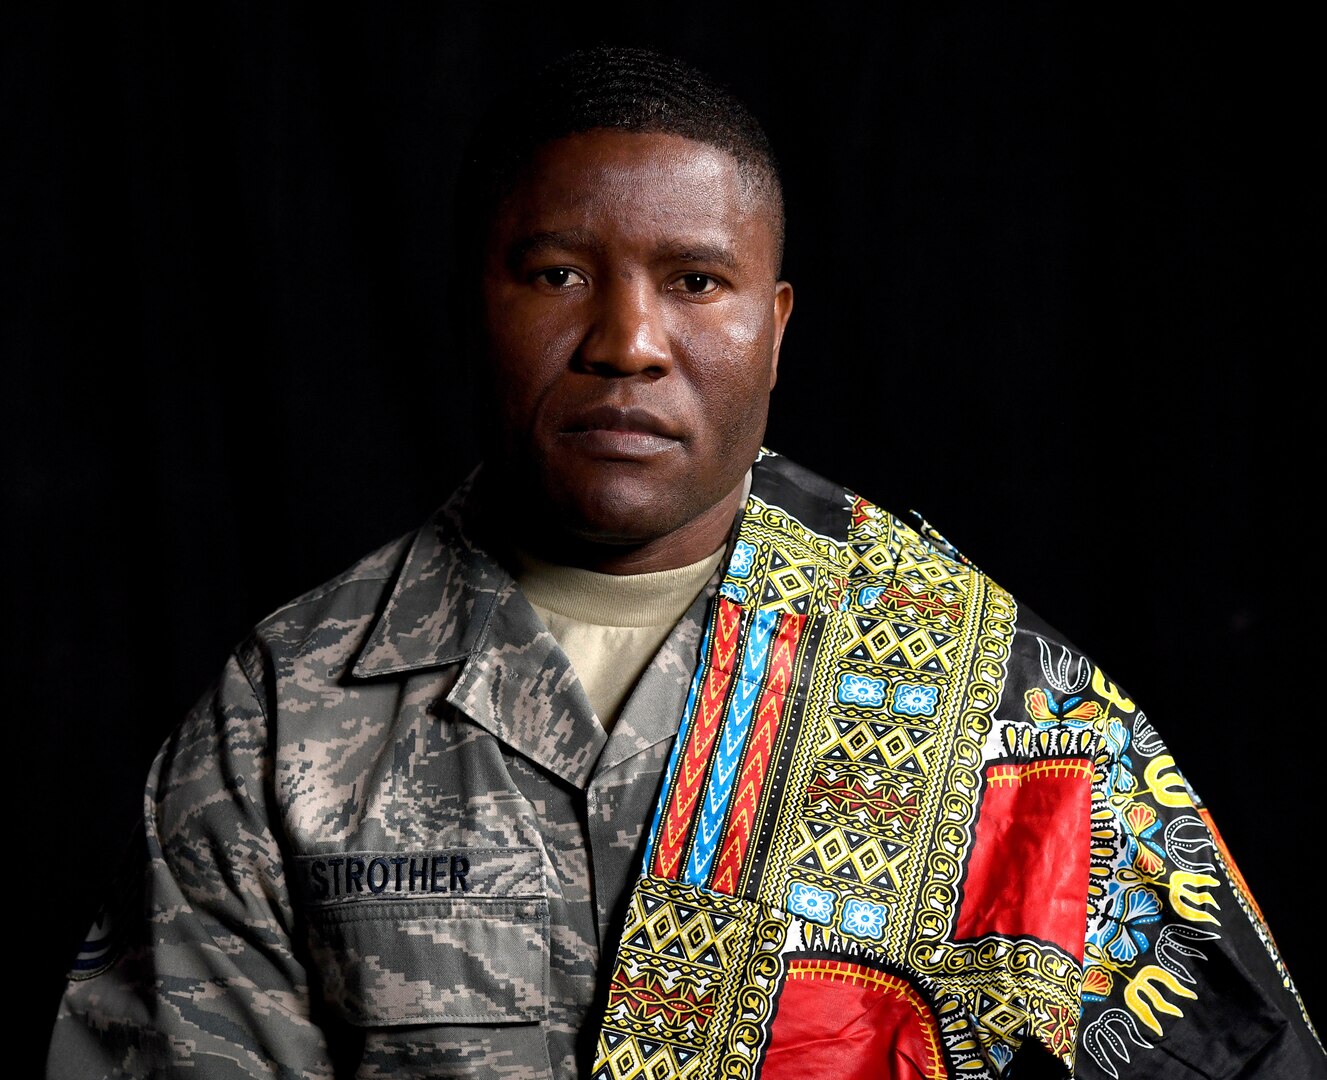 U.S. Air Force Tech. Sgt. Francis Strother, recruiter for the 145th Airlift Wing, poses at the North Carolina Air National Guard (NCANG) Base, Charlotte Douglas International Airport, Jan. 17, 2019. Strother tells a story of how he came from Monrovia, Liberia, following a civil war in his country that lasted almost eight years. Strother details his struggles of helping raise his brothers and feed his neighbors while maintaining a positive and hopeful attitude.